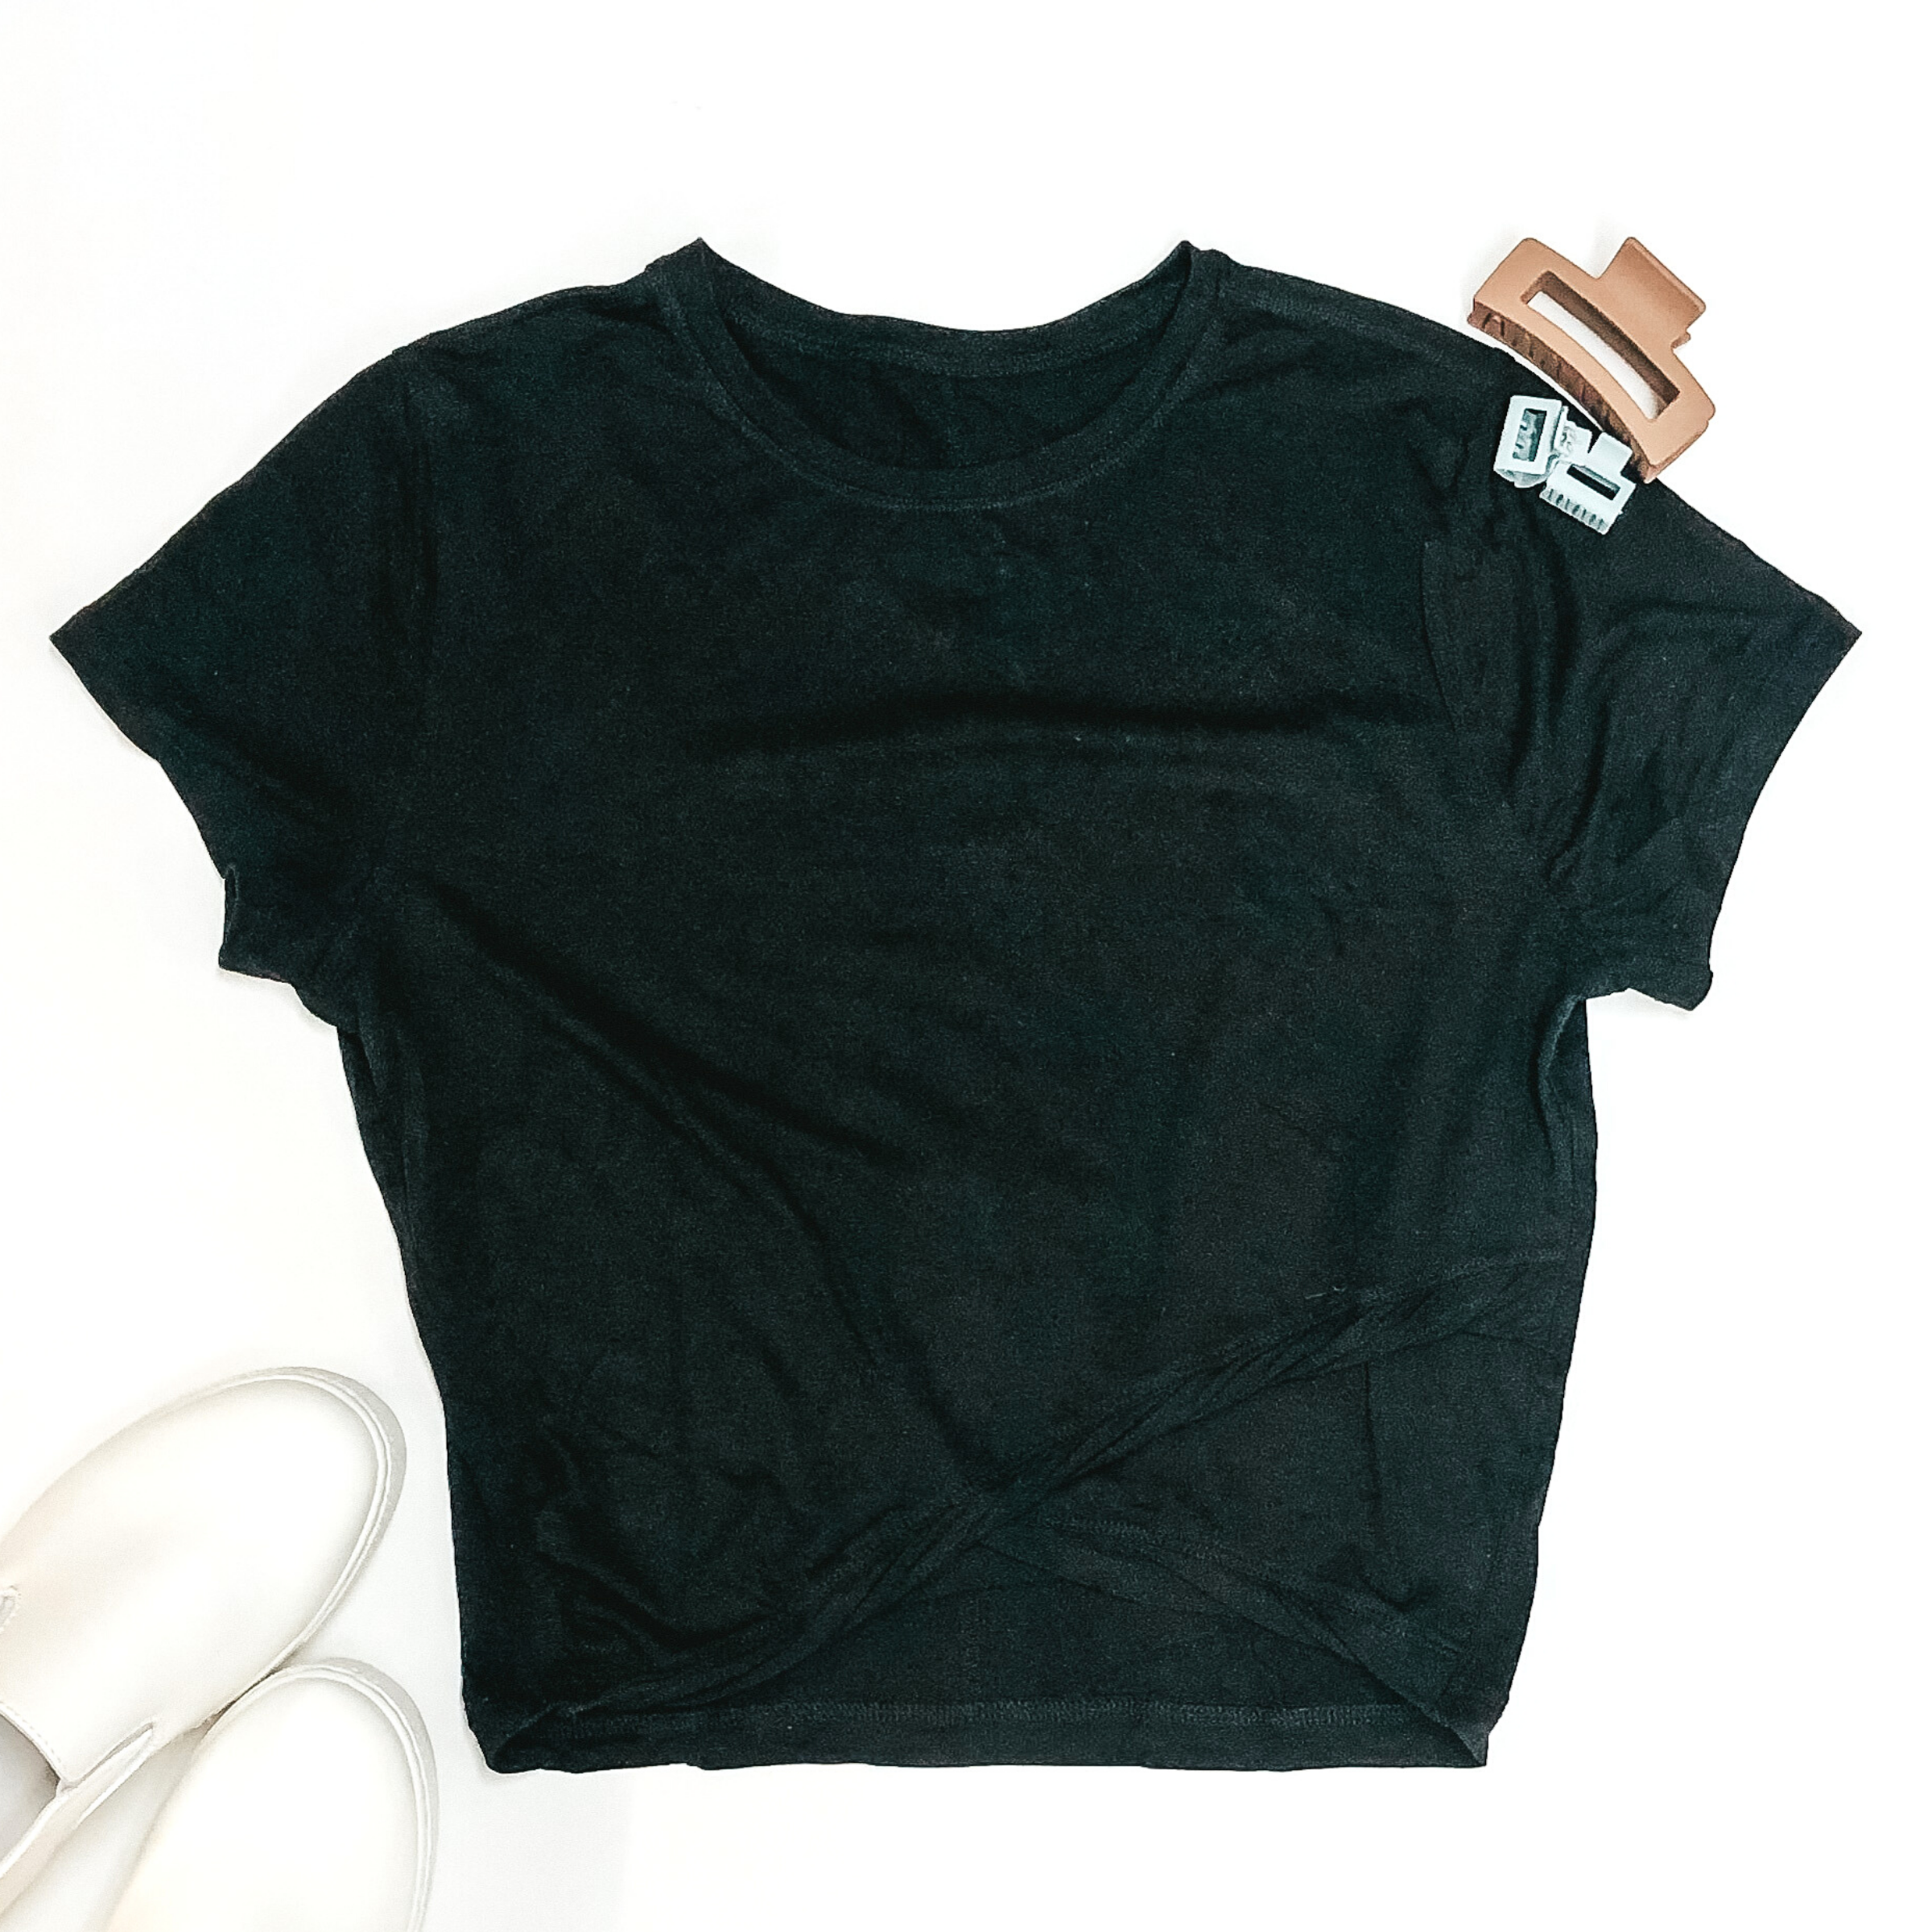 Short sleeve, cropped black tee. This tee is cropped, has a criss cross hemline, nad a scoop neckline. This tee is pictured on a white background with white shoes and hair clips in the background.